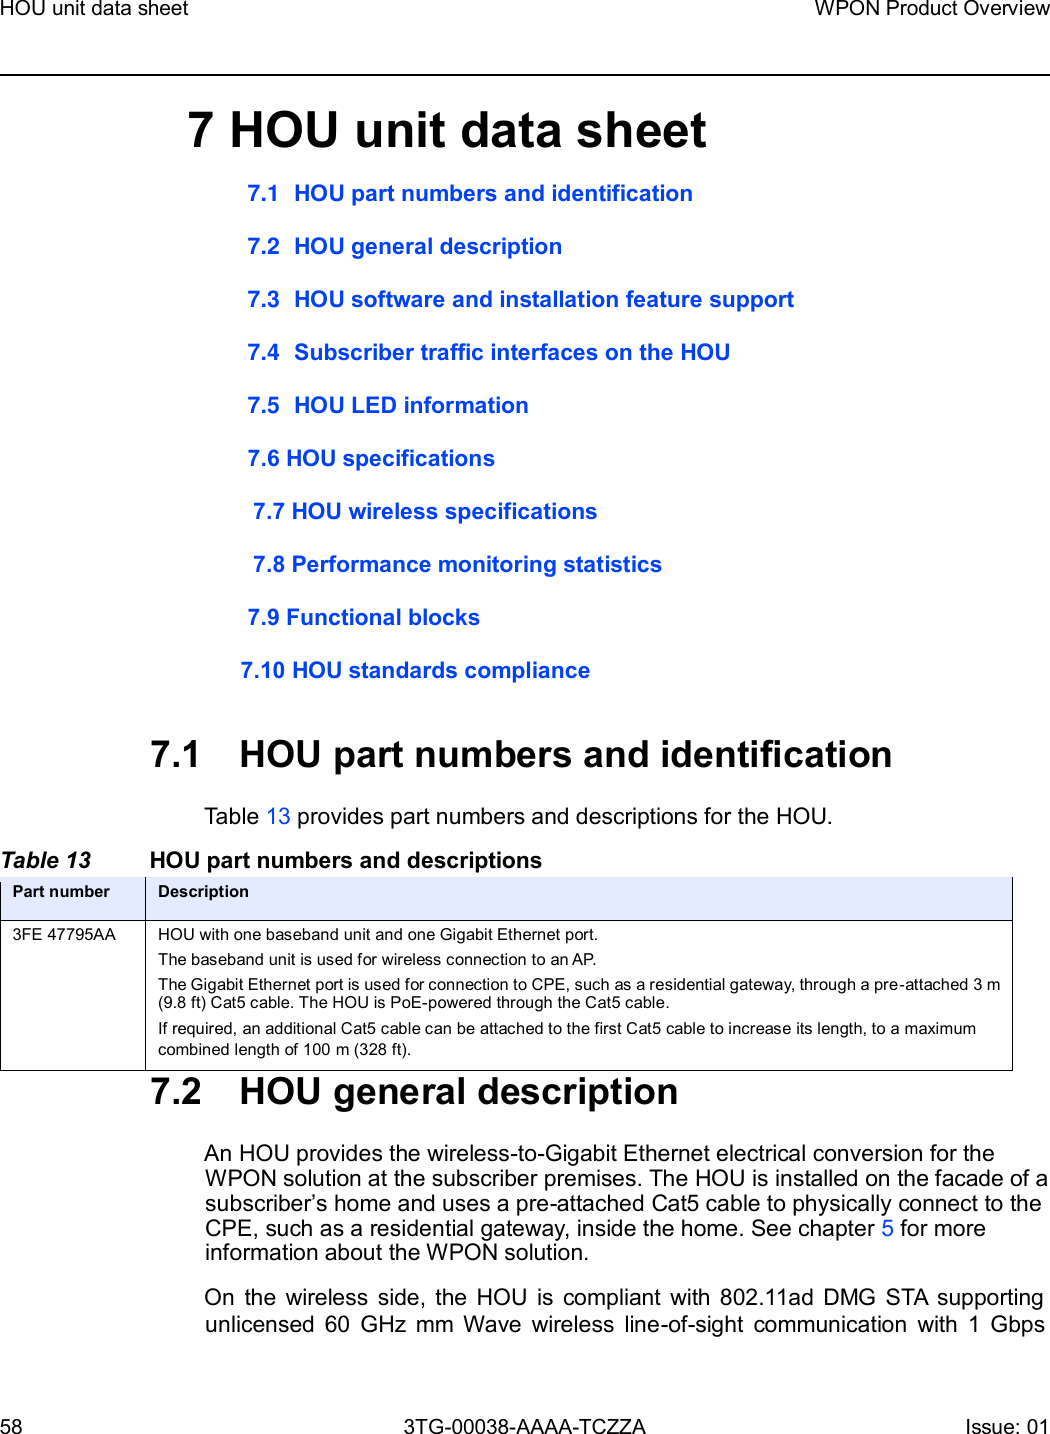 Page 58 of Nokia Bell 7577WPONAPED WPON User Manual WPON Product Overview